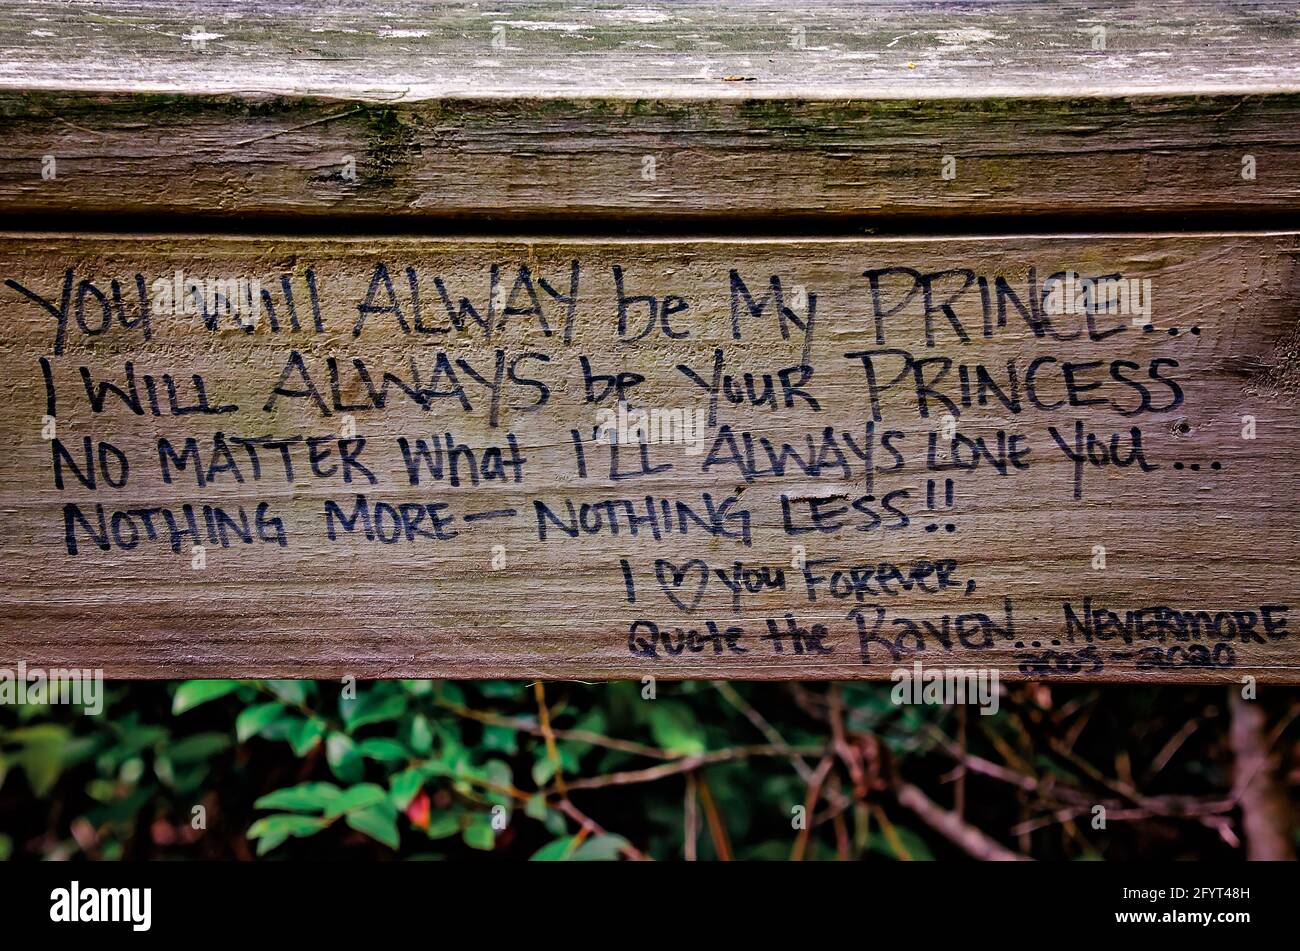 A love letter is scrawled on the wooden railing at Magnolia Landing, May 27, 2021, in Magnolia Springs, Alabama. Stock Photo